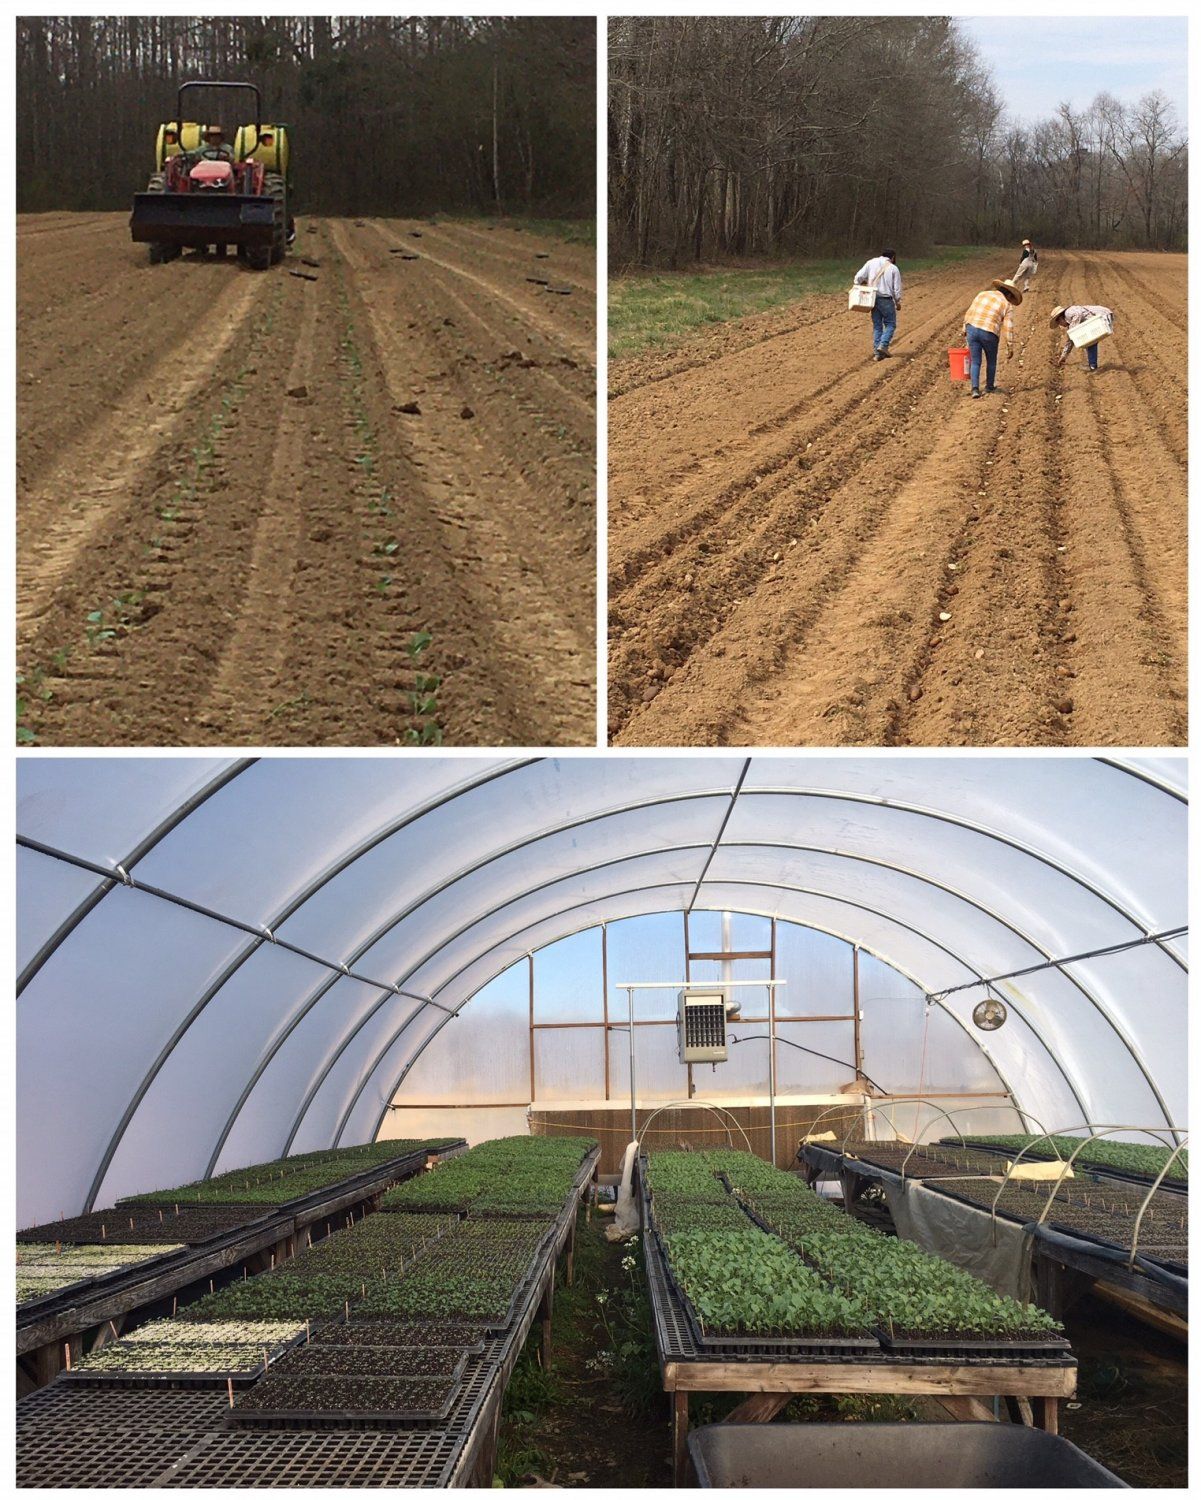 Previous Happening: Farm Happenings for March 23rd, 2021